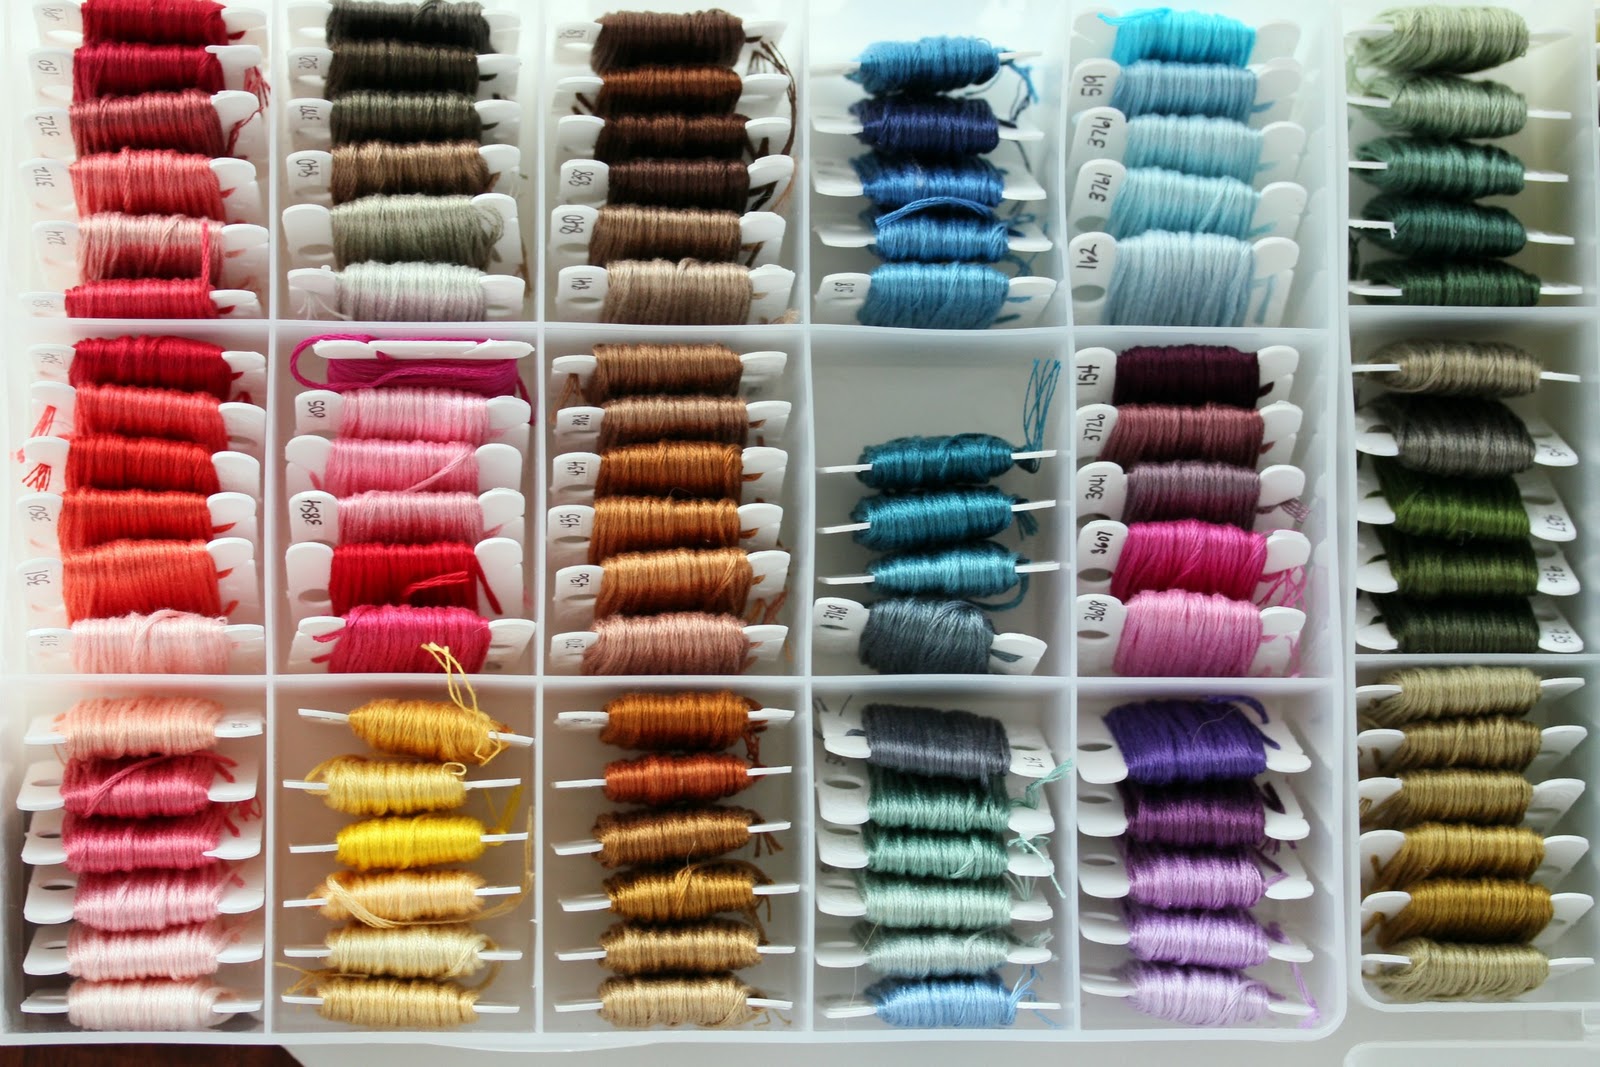 Embroidery Thread | Supplies | Designs | Embroidery Blanks